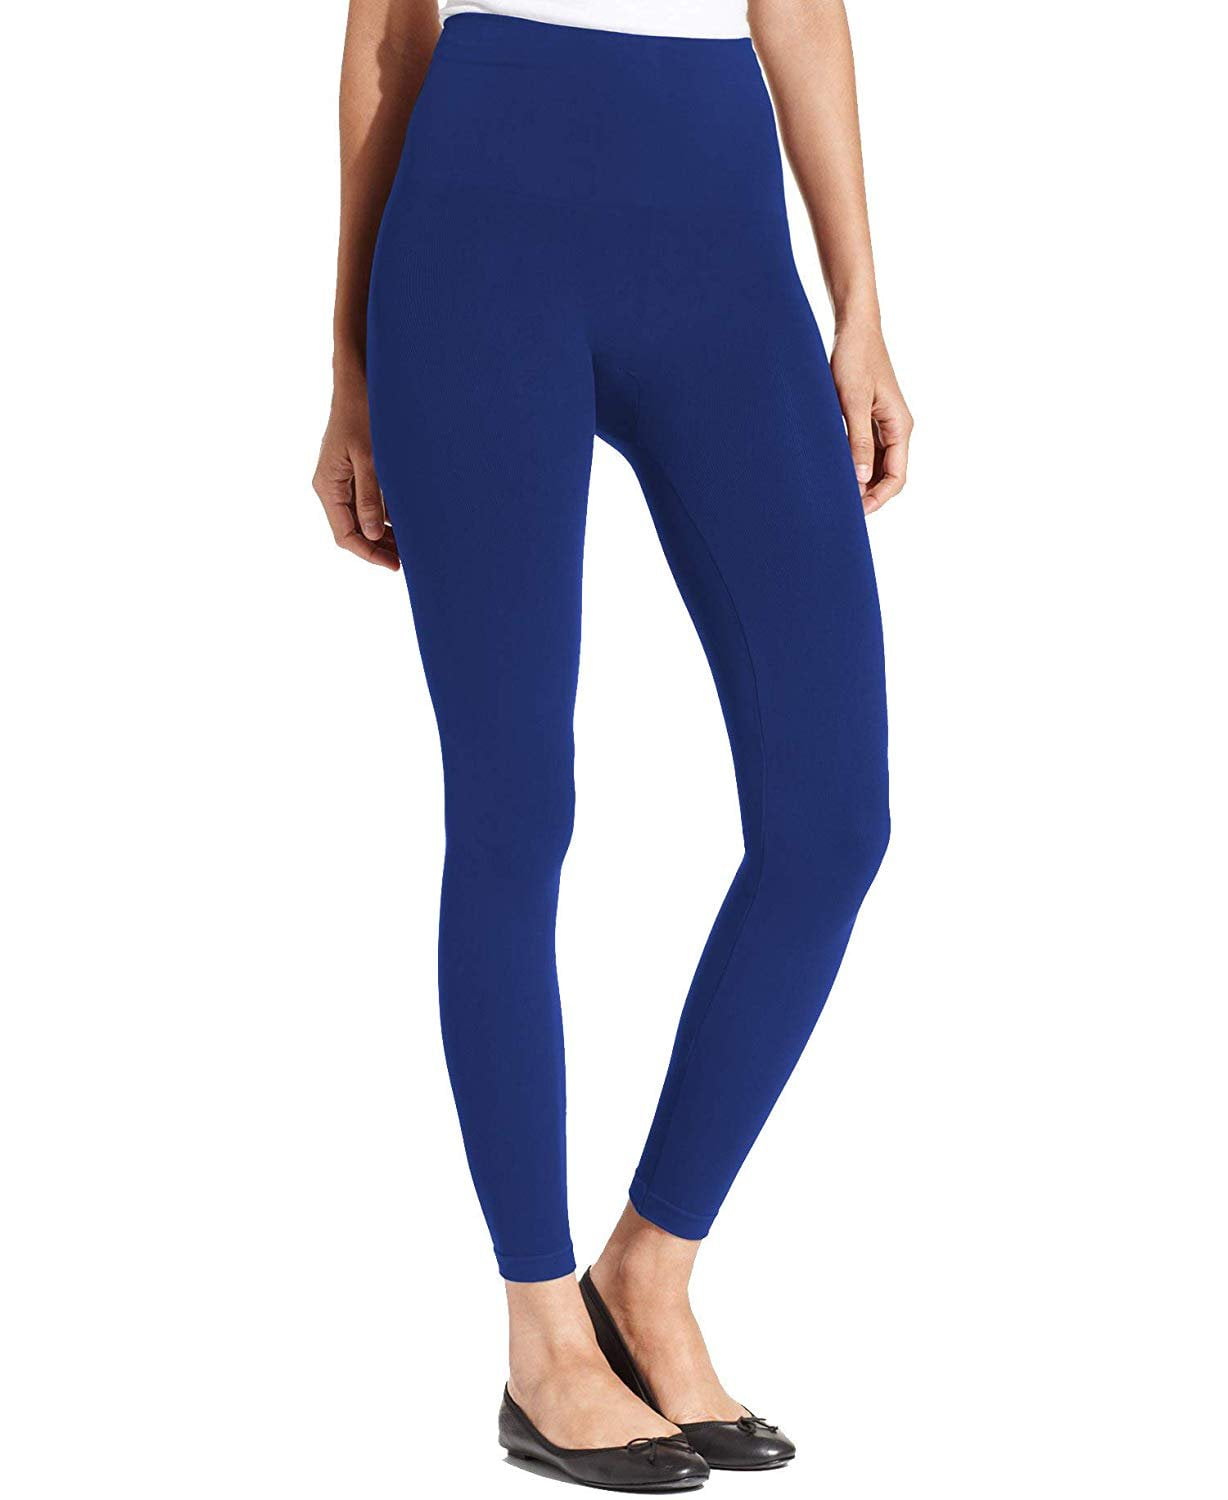 Are Spanx Leggings Good For You